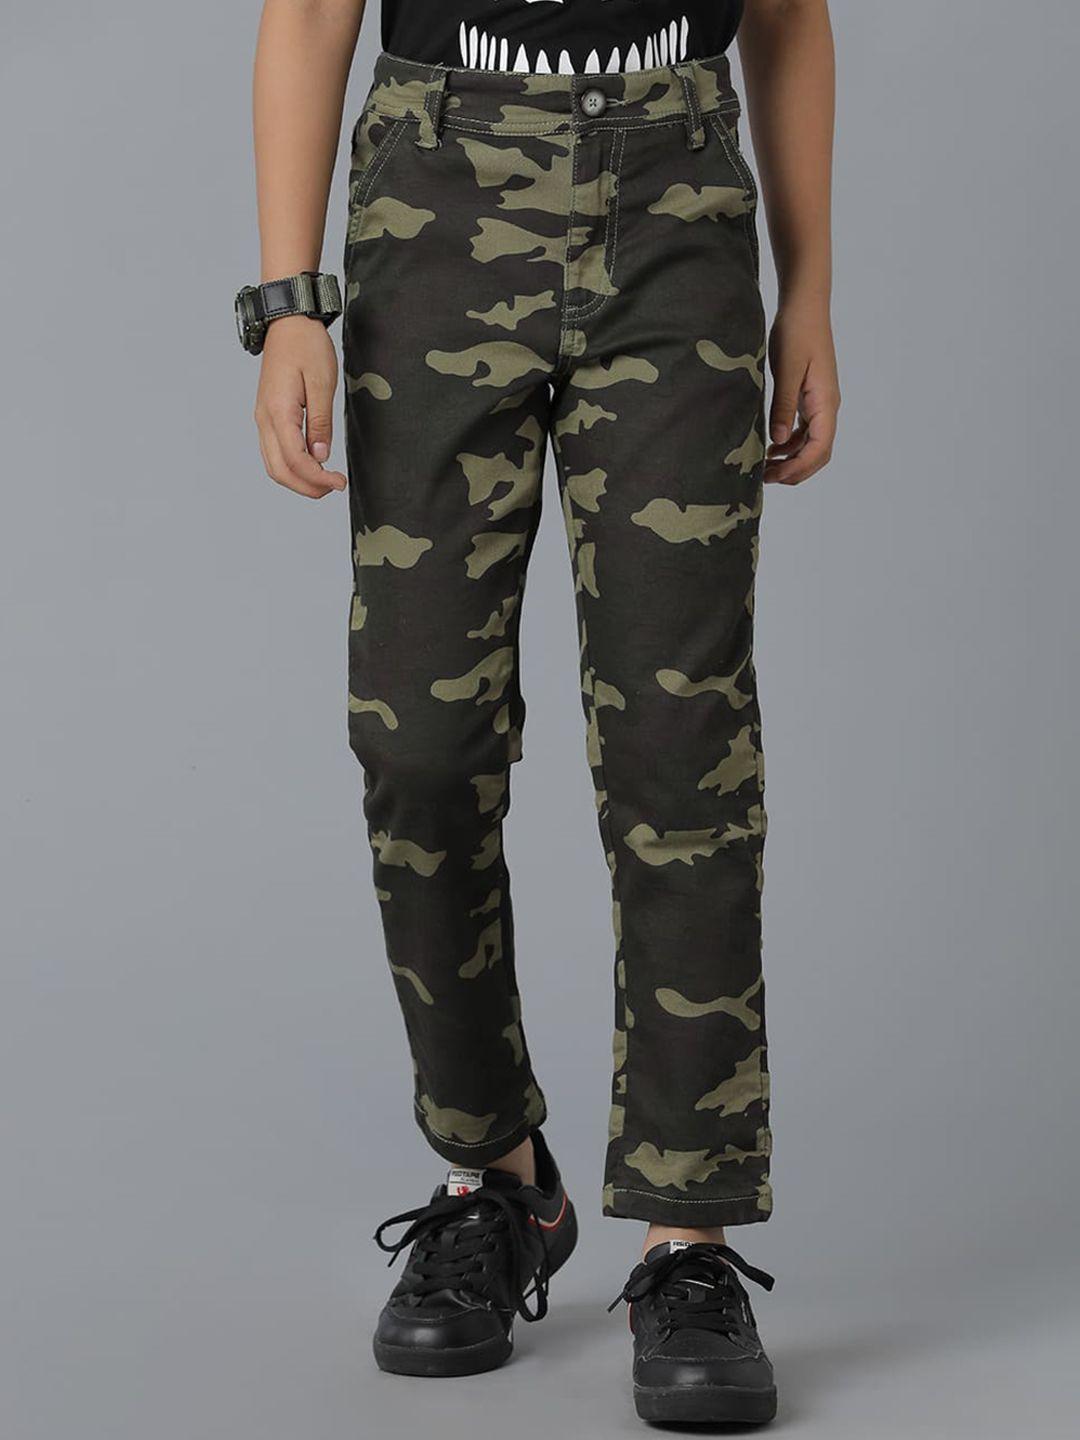 under fourteen only boys camouflage printed cotton cargos